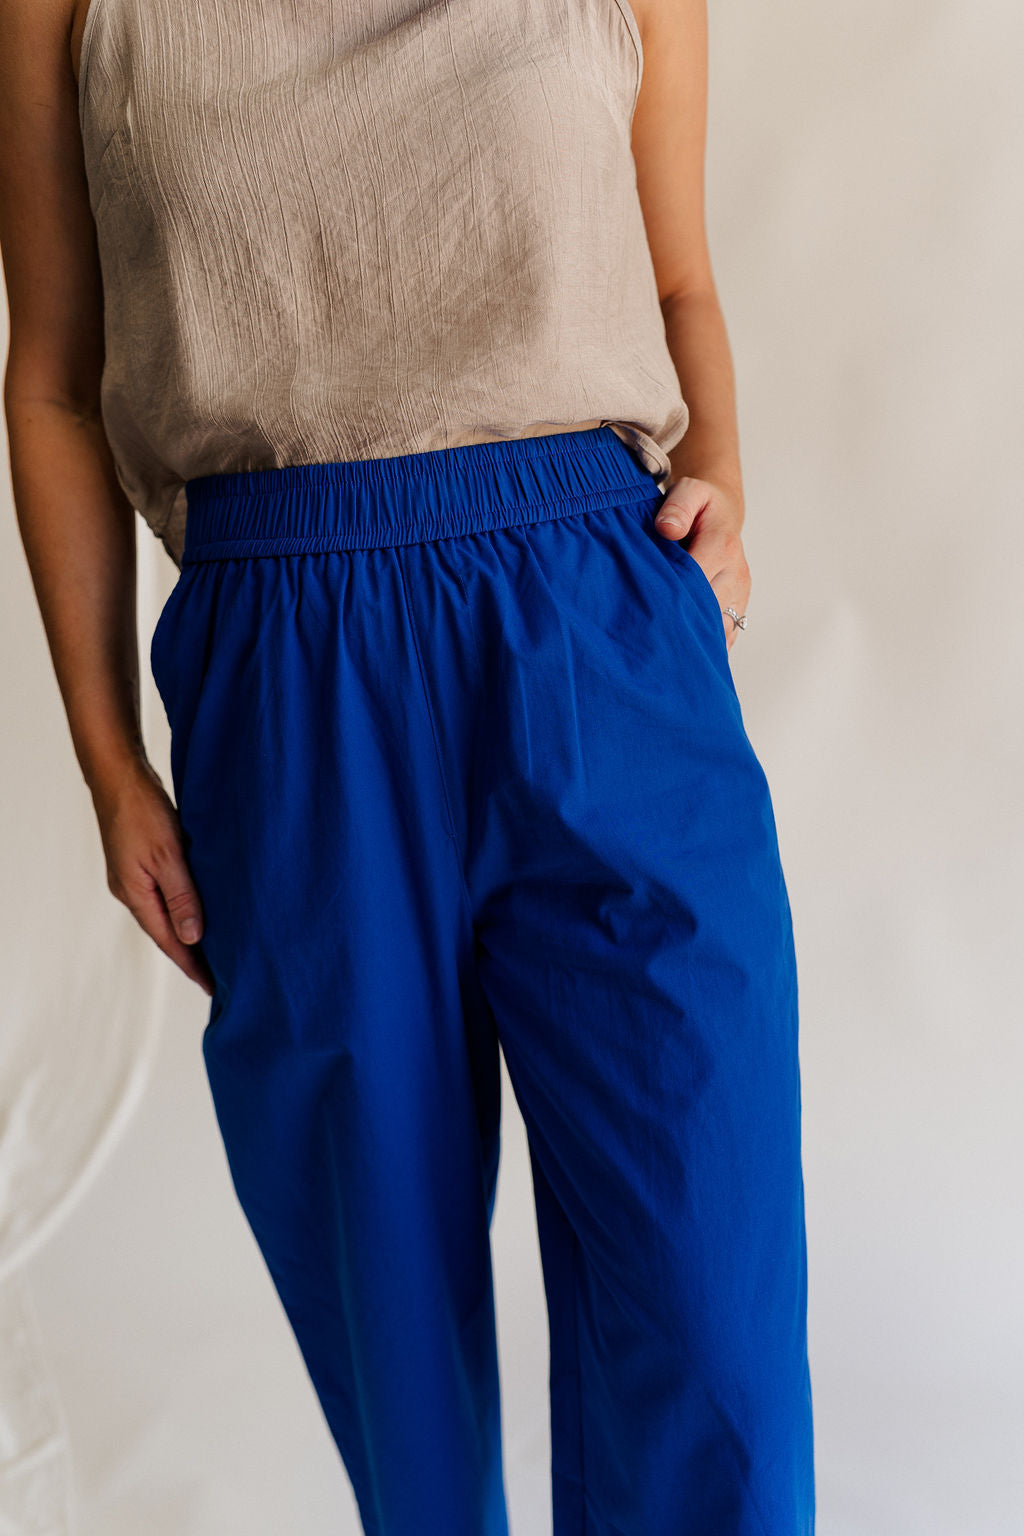 Close up view of female model wearing the Freya Cobalt Blue Straight Leg Pants which features Cobalt Blue Cotton Fabric, Wide Pant Legs, Elastic Waistband and Two Side Pockets